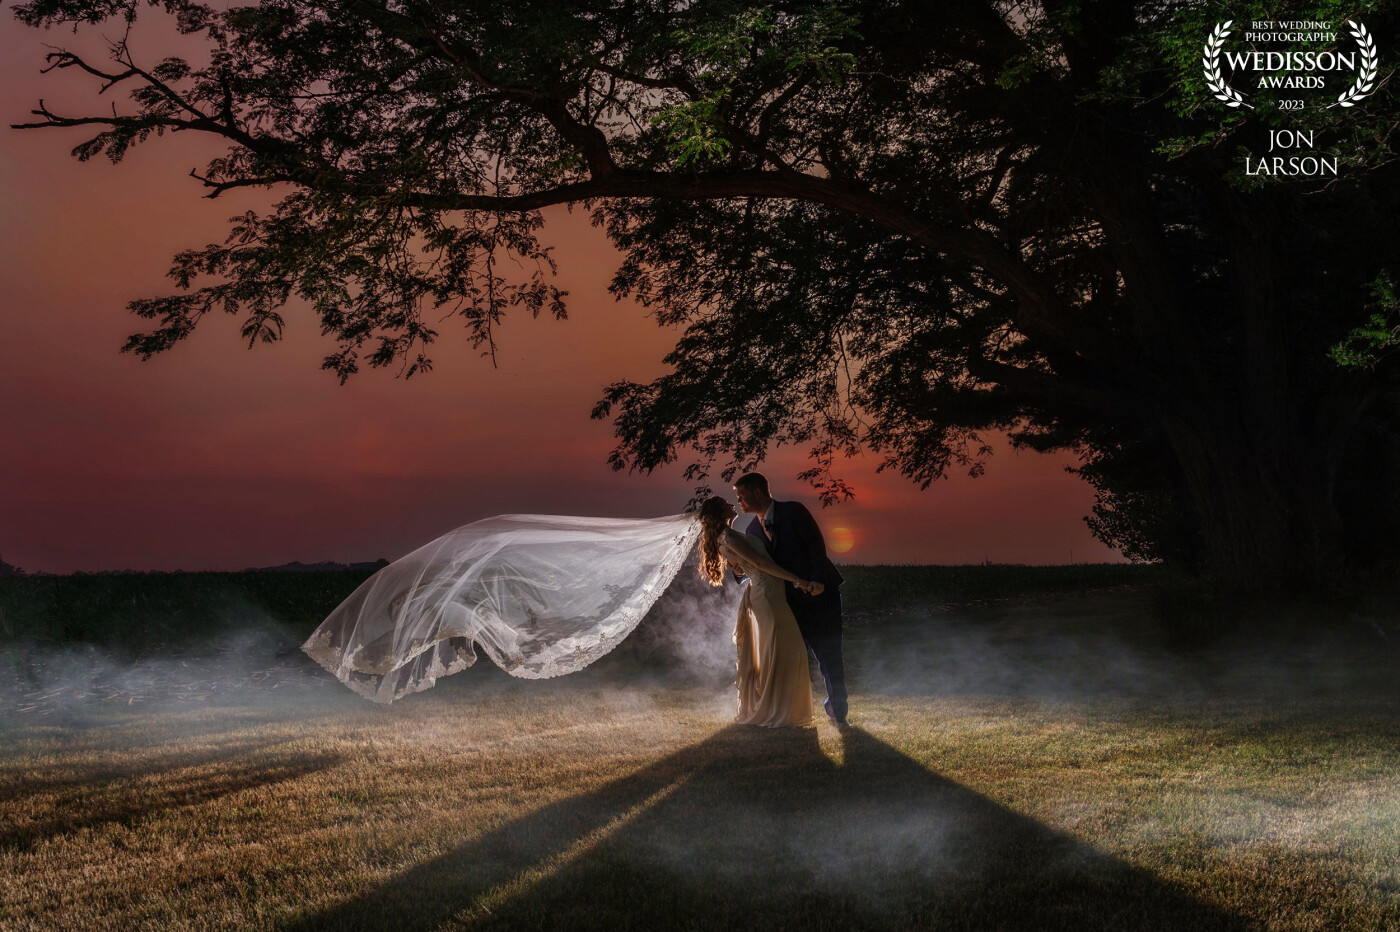 With a very hazy sky I had to get this couple out for this very different sunset. Ashlee’s veil was angelic!